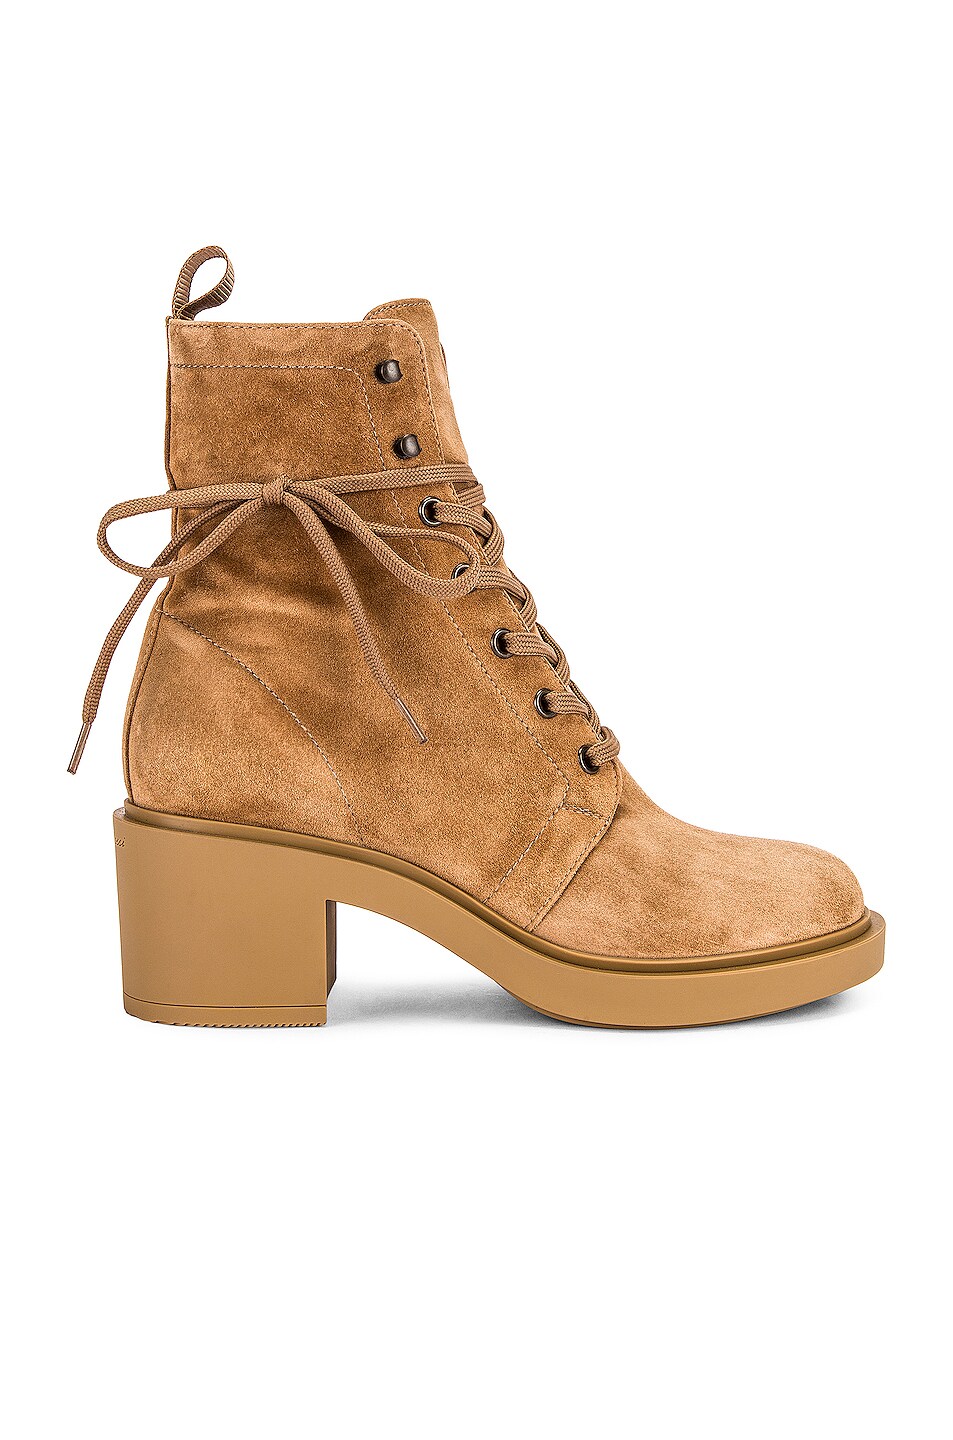 Image 1 of Gianvito Rossi Foster Suede Lace Up Boots in Camel